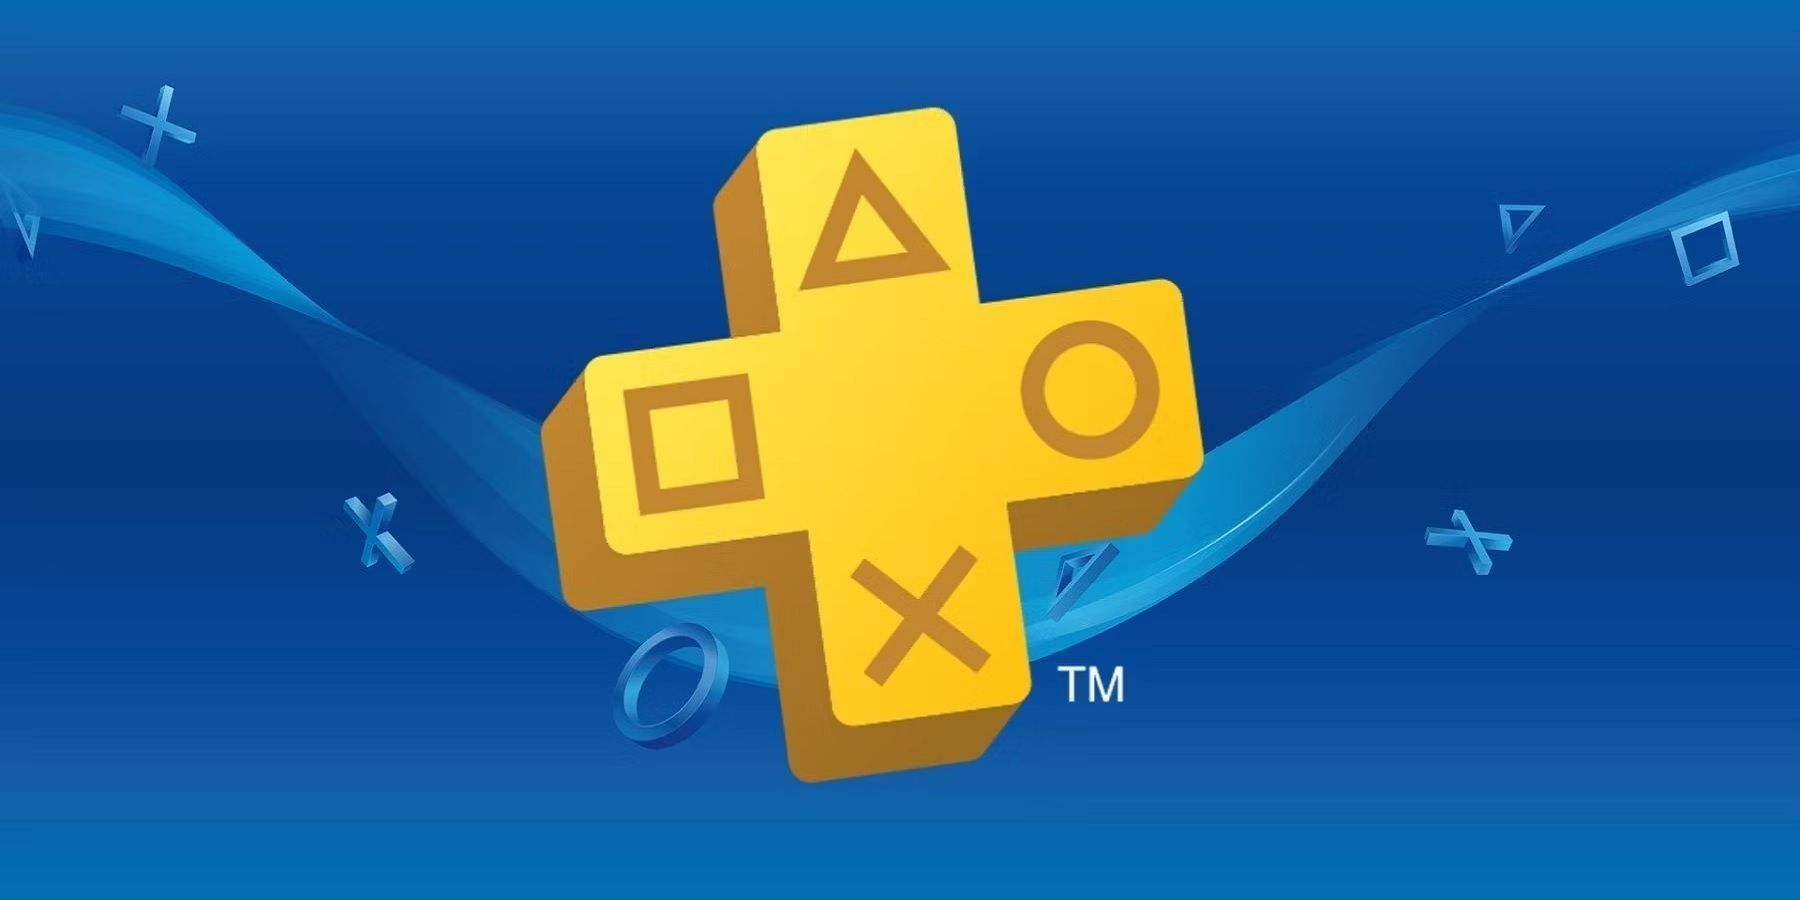 The Callisto Protocol will be on PlayStation Plus Essential in October.  Source:Billbil_kun : r/TheCallistoProtocol